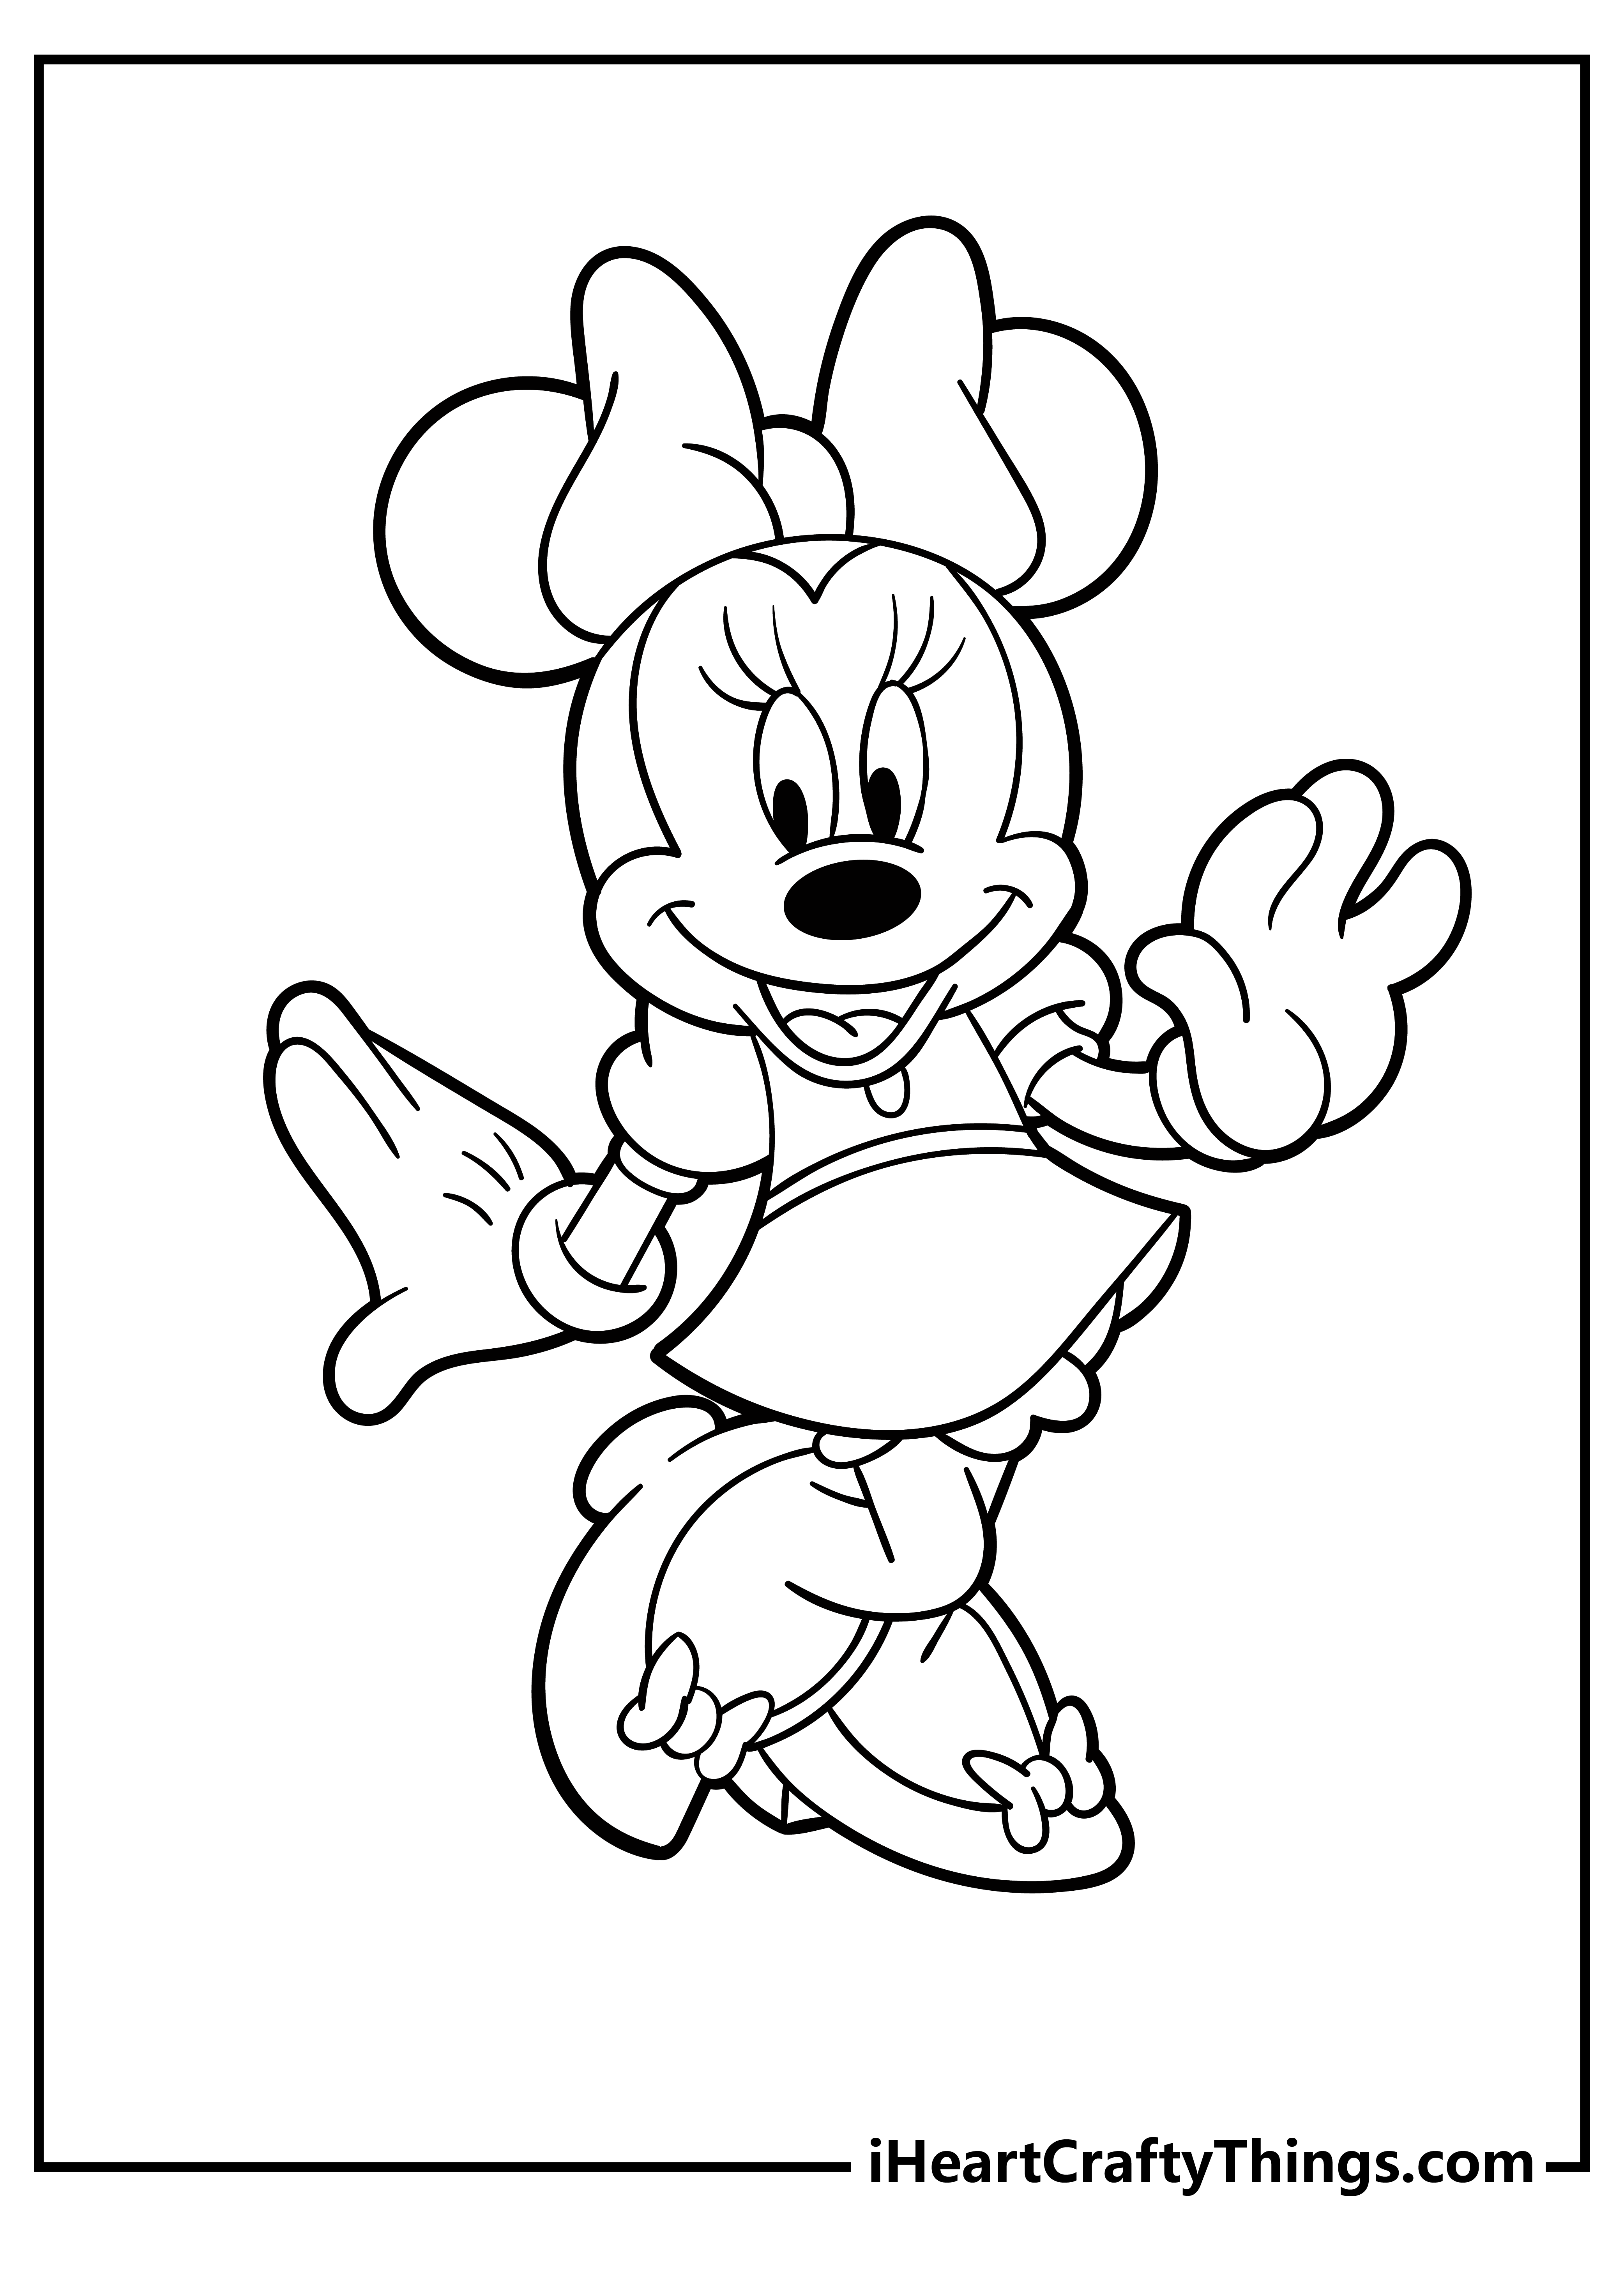 Printable Minnie Mouse Coloring Pages Updated 20